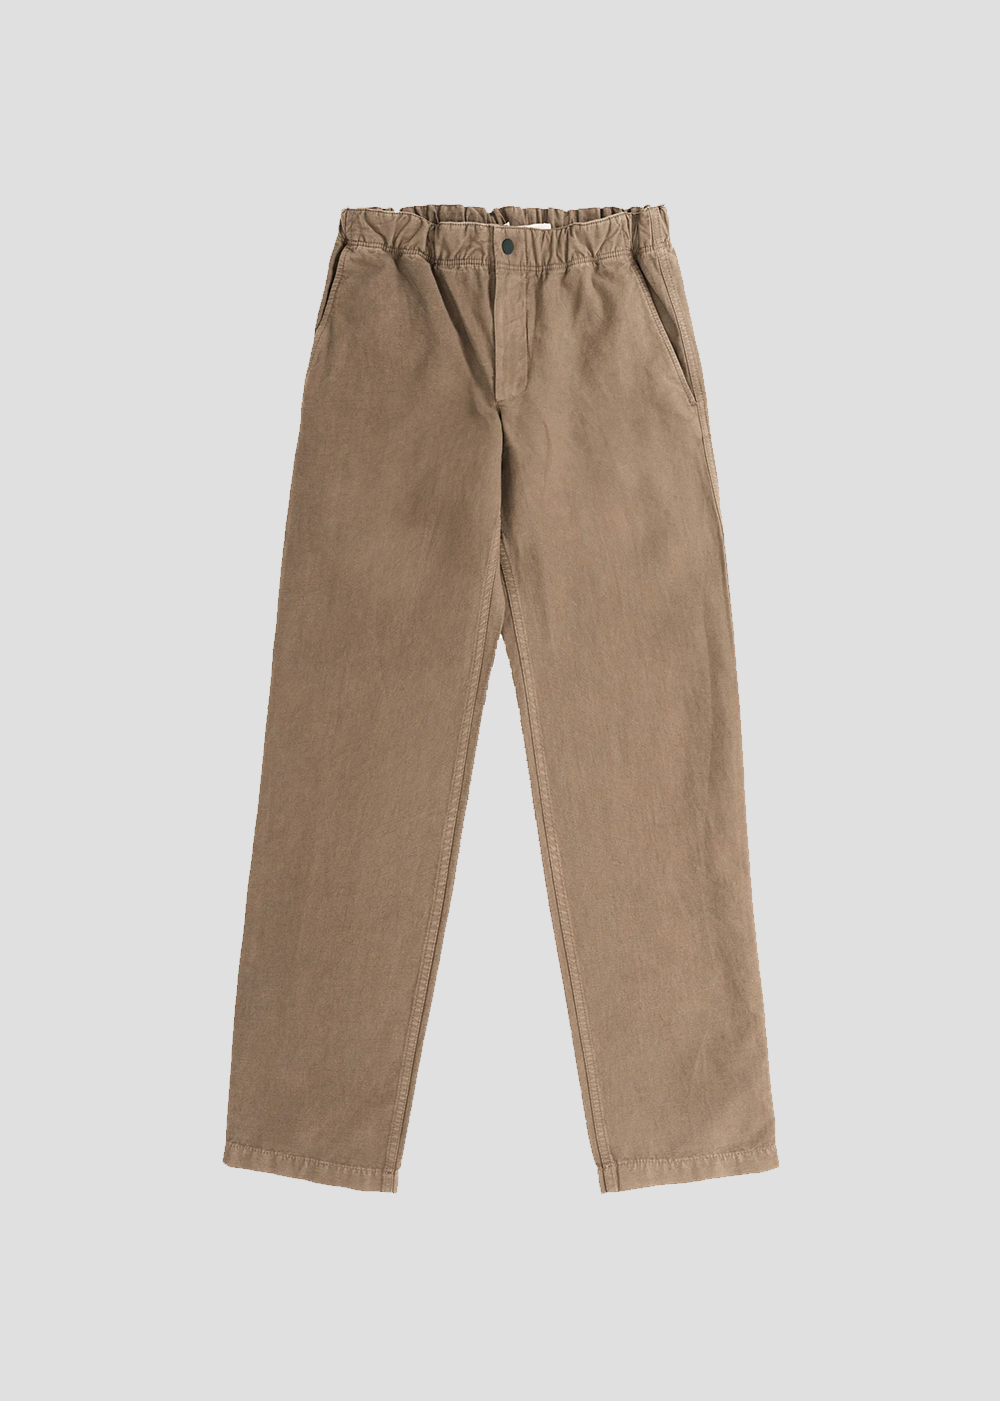 Ezra Relaxed Cotton Linen Trouser by Norse Projects - Danali